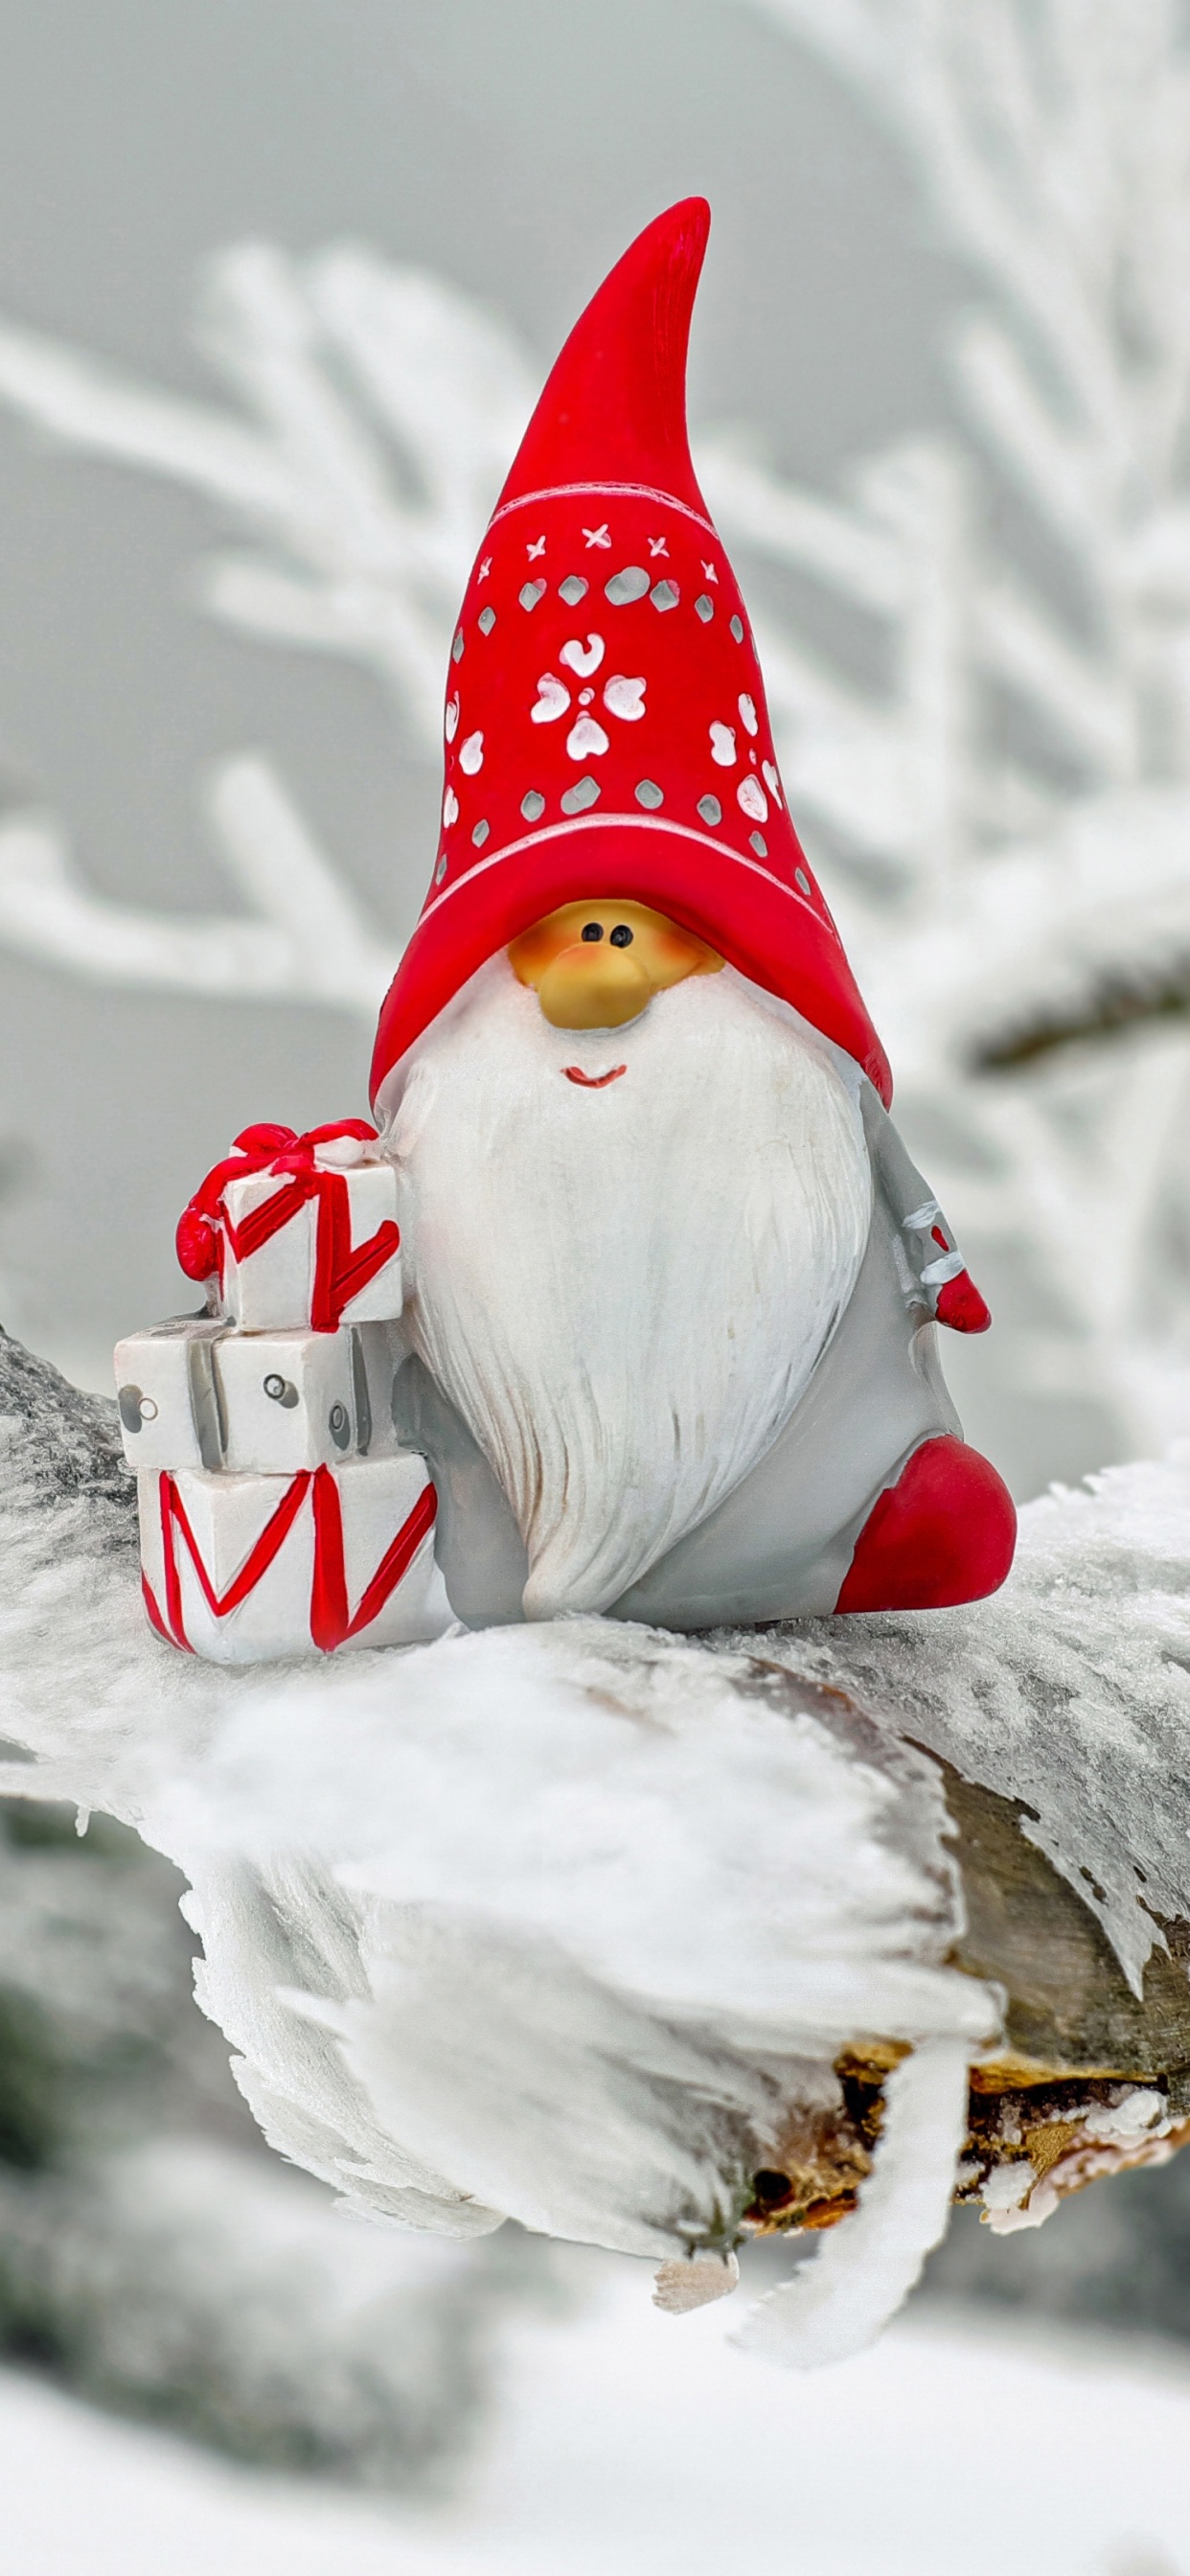 Santa Claus, Christmas Day, Winter, Snow, Freezing. Wallpaper in 1242x2688 Resolution